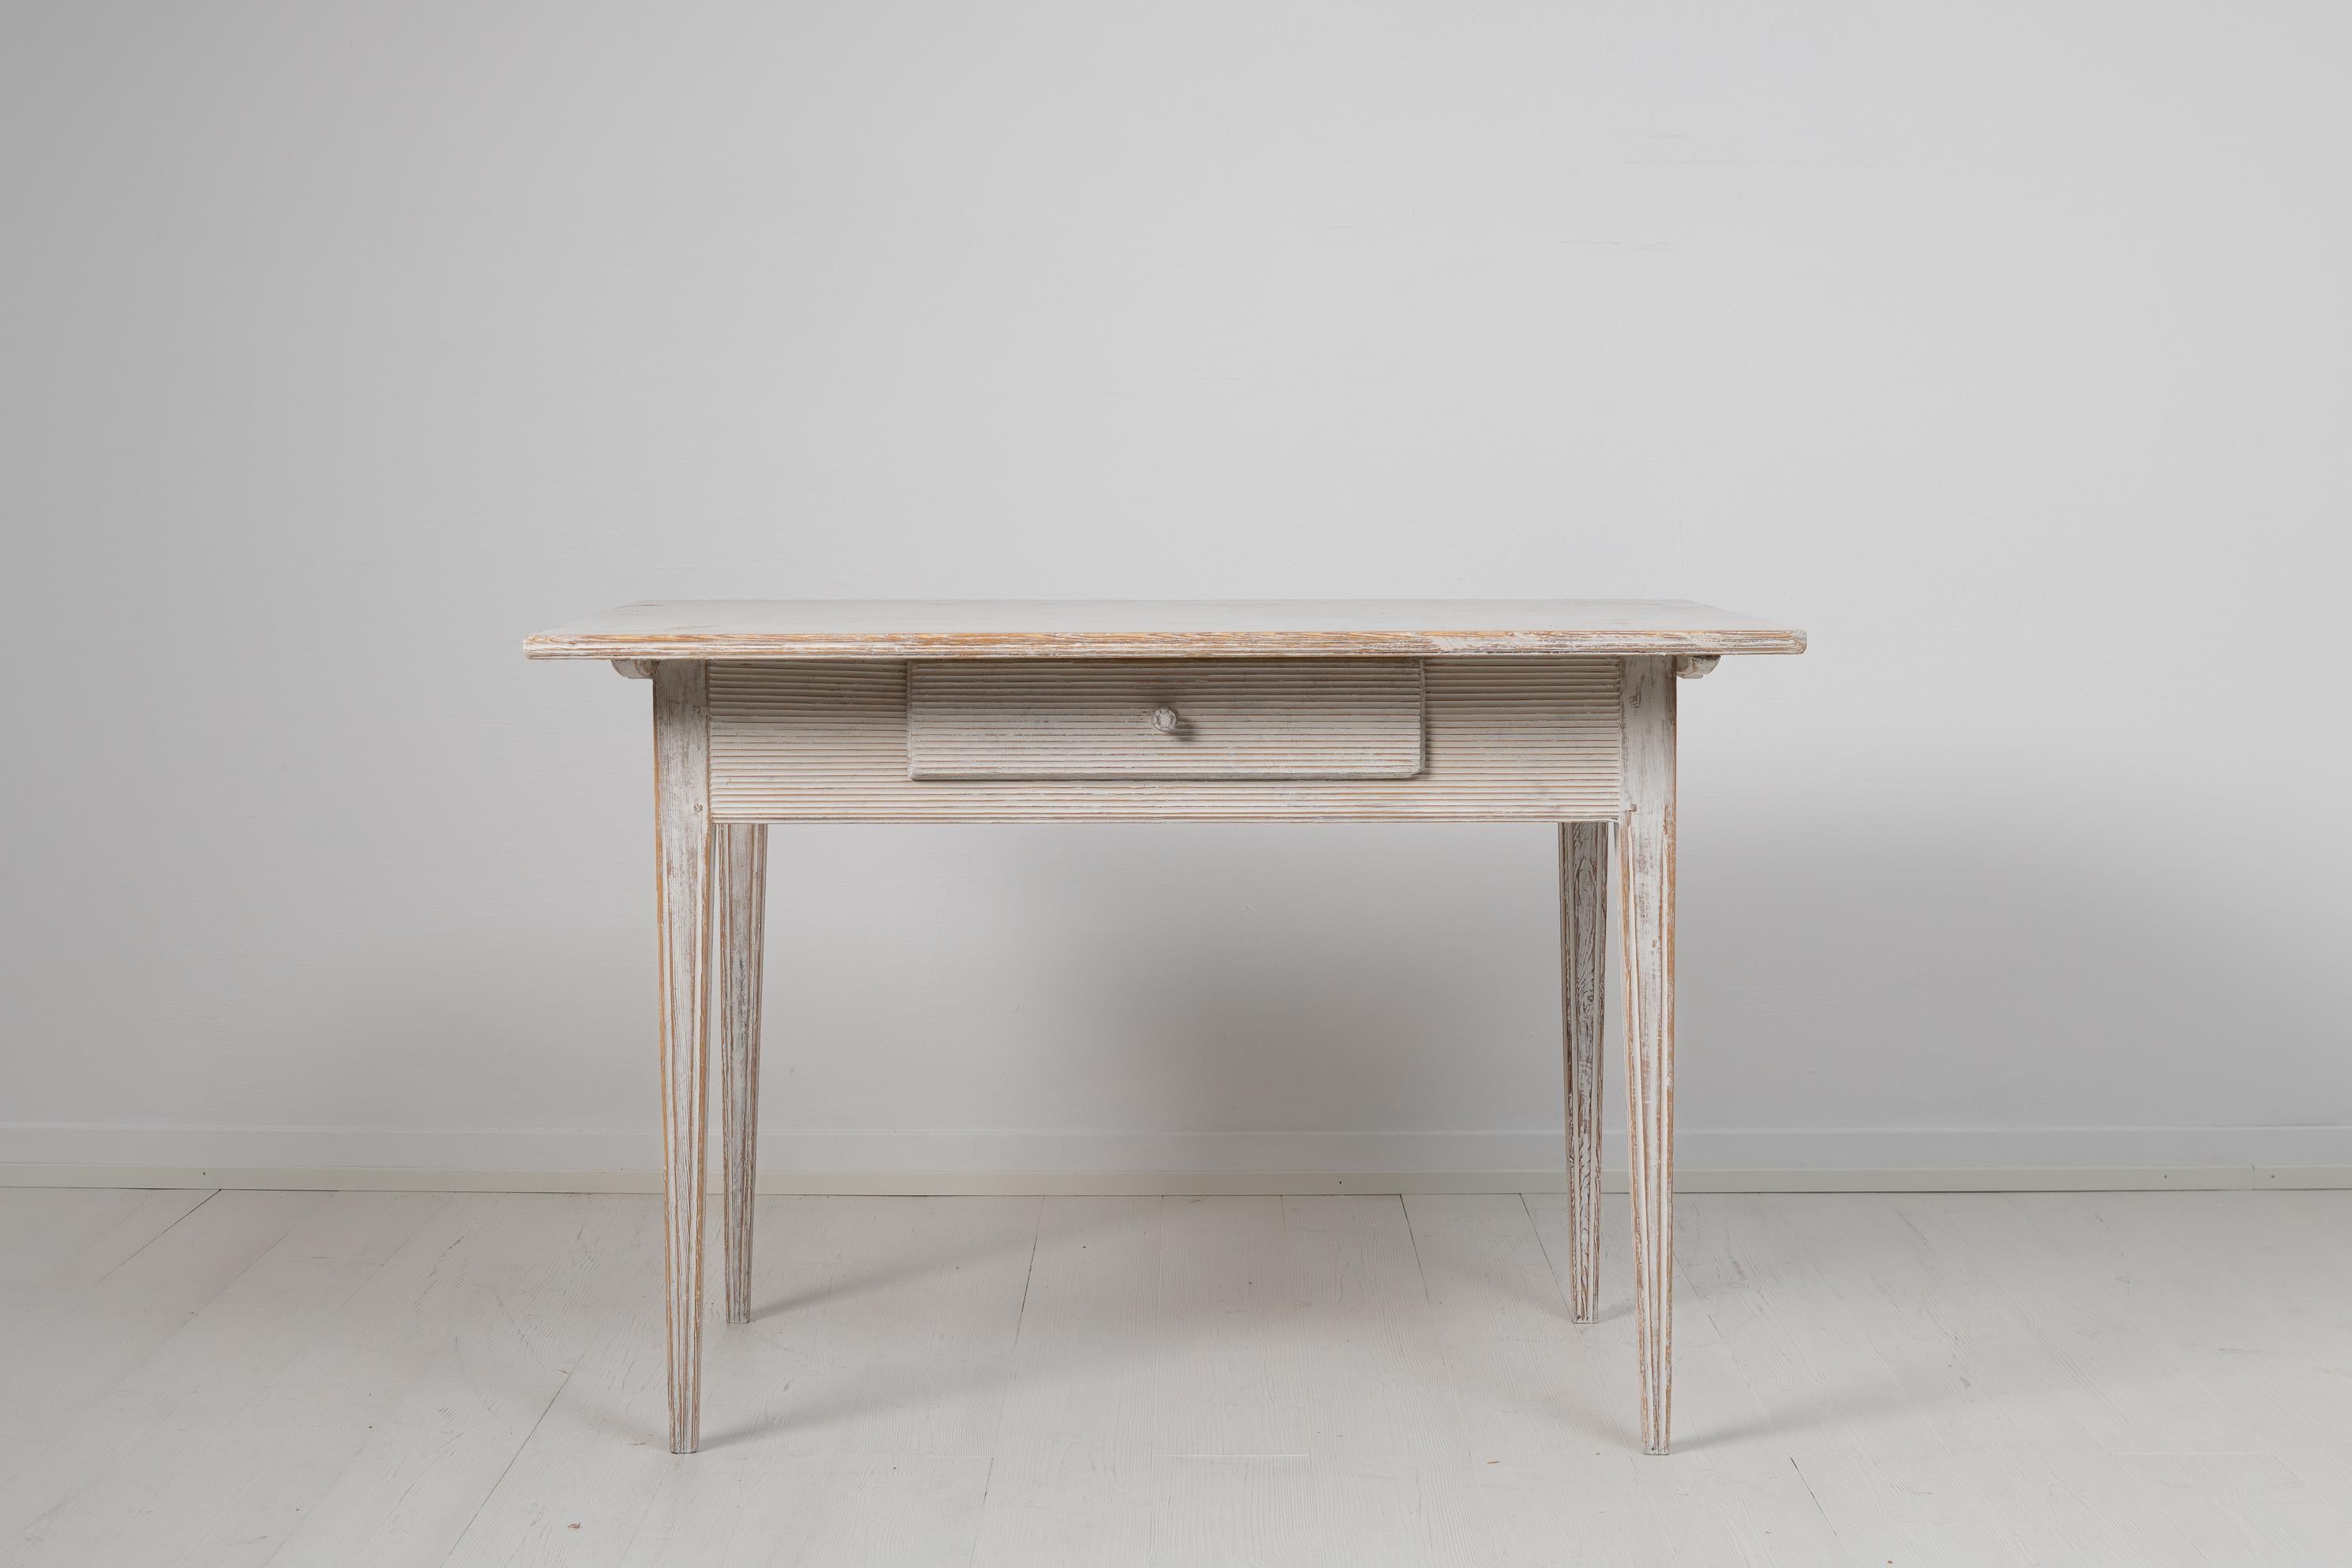 Northern Swedish gustavian table with a drawer hand-made in pine. The table is Neoclassic, or gustavian as the Swedish period is known as, with the classic gustavian decor. The table is from around 1790 to 1810 and has straight tapered legs with